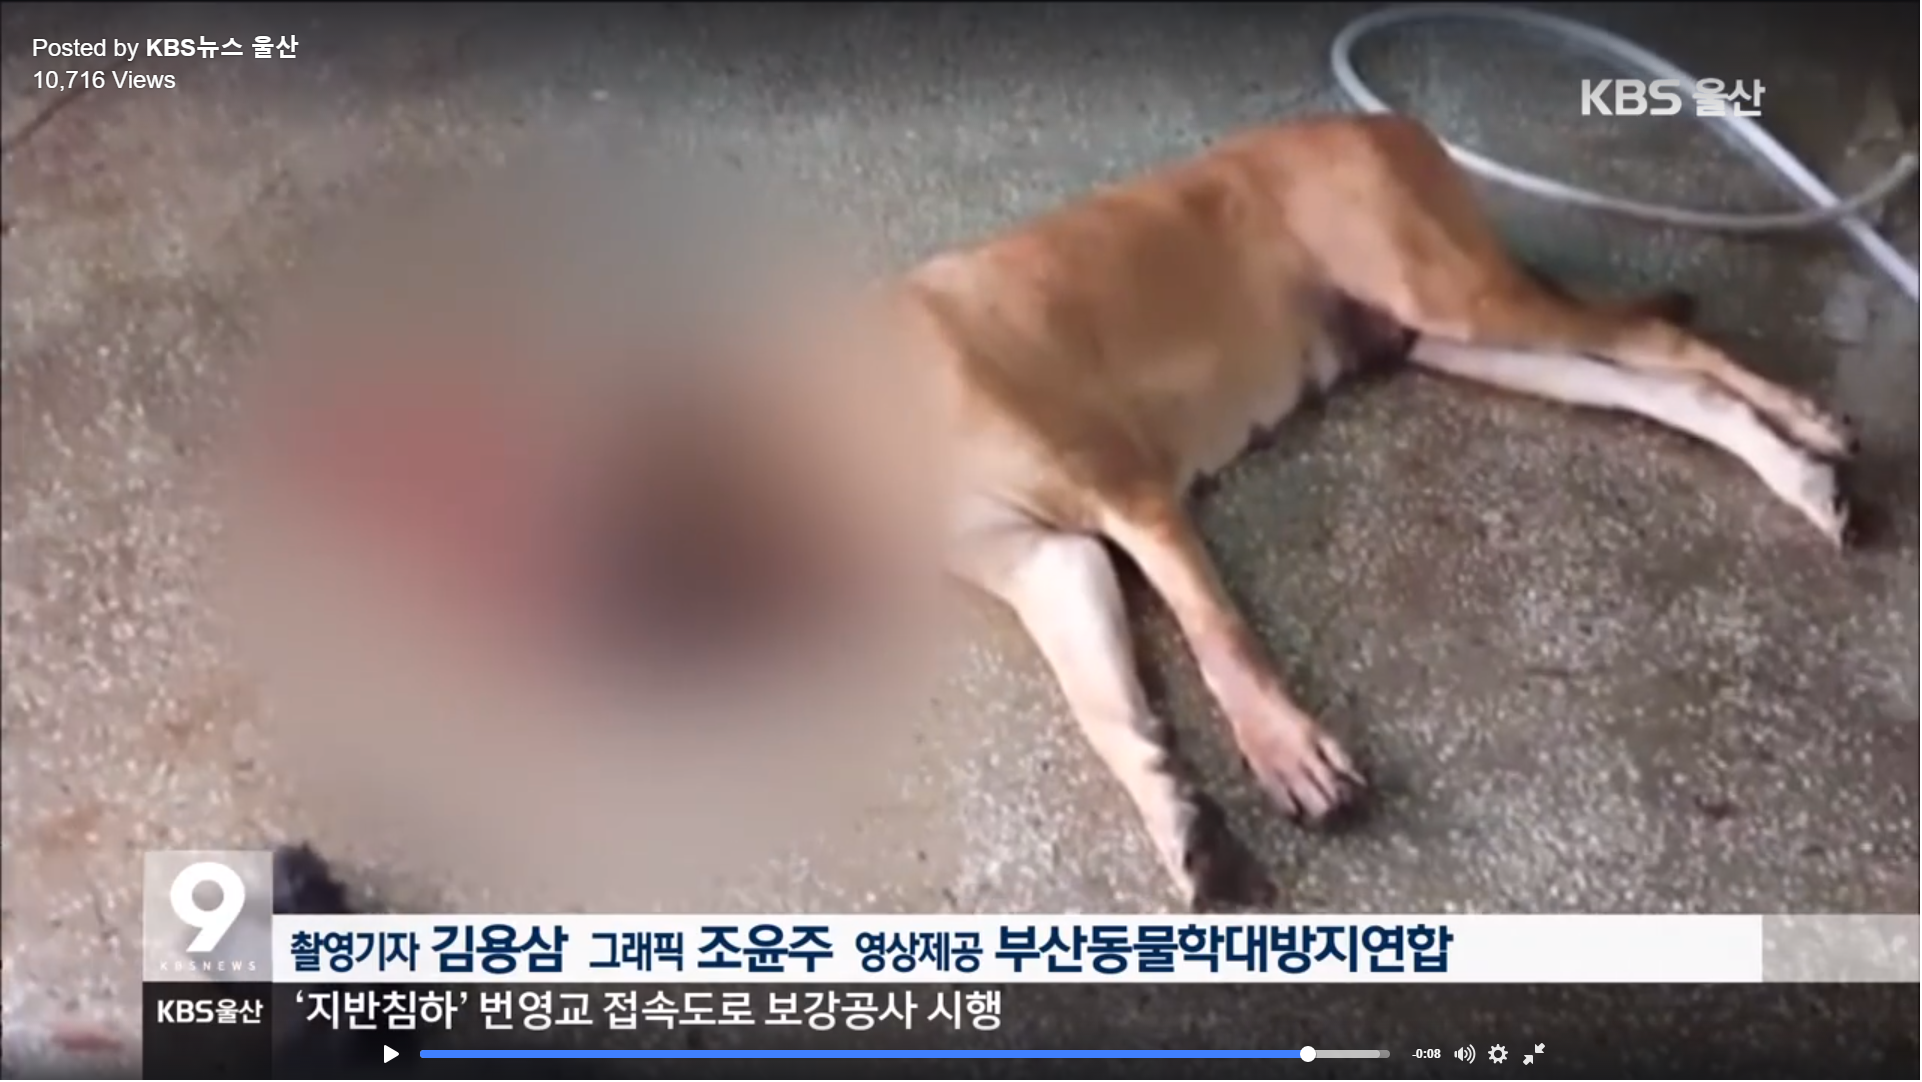 Ulsan Dog Meat Market illegal dog slaughter… Knife stuck in throat, gasping in agony